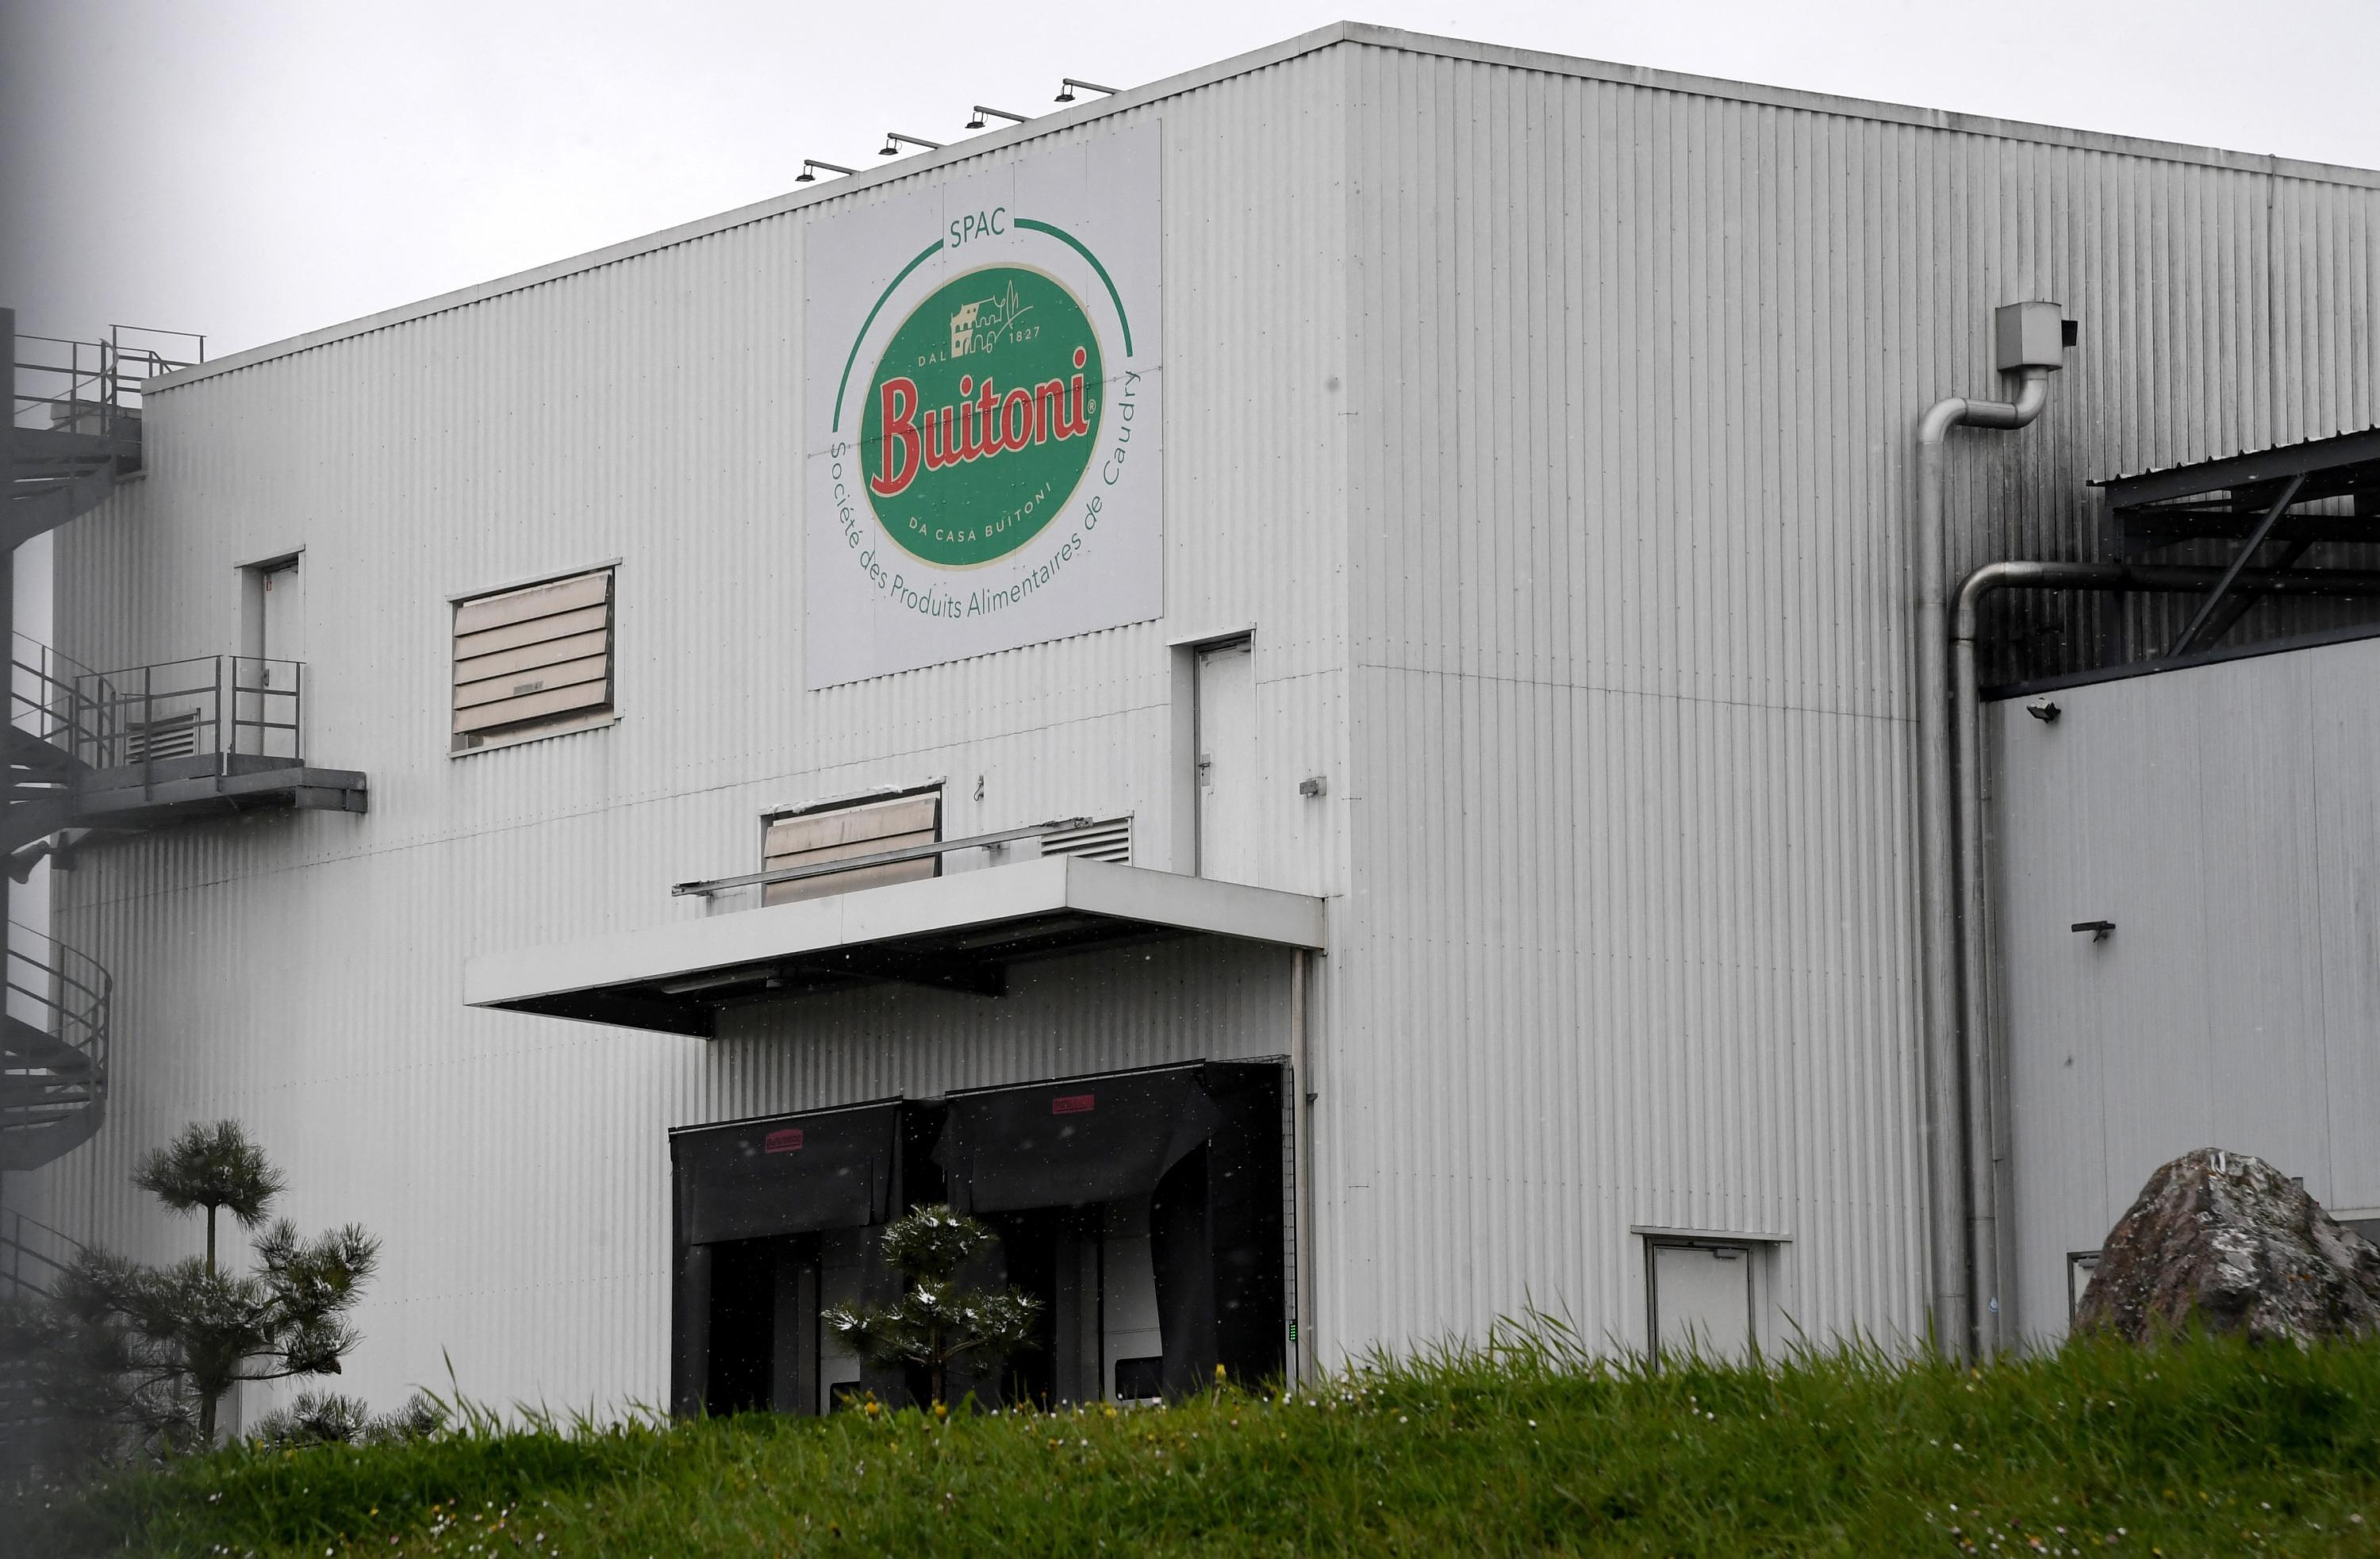 Contaminated pizzas: Italian Italpizza takes over the Buitoni factory in Caudry